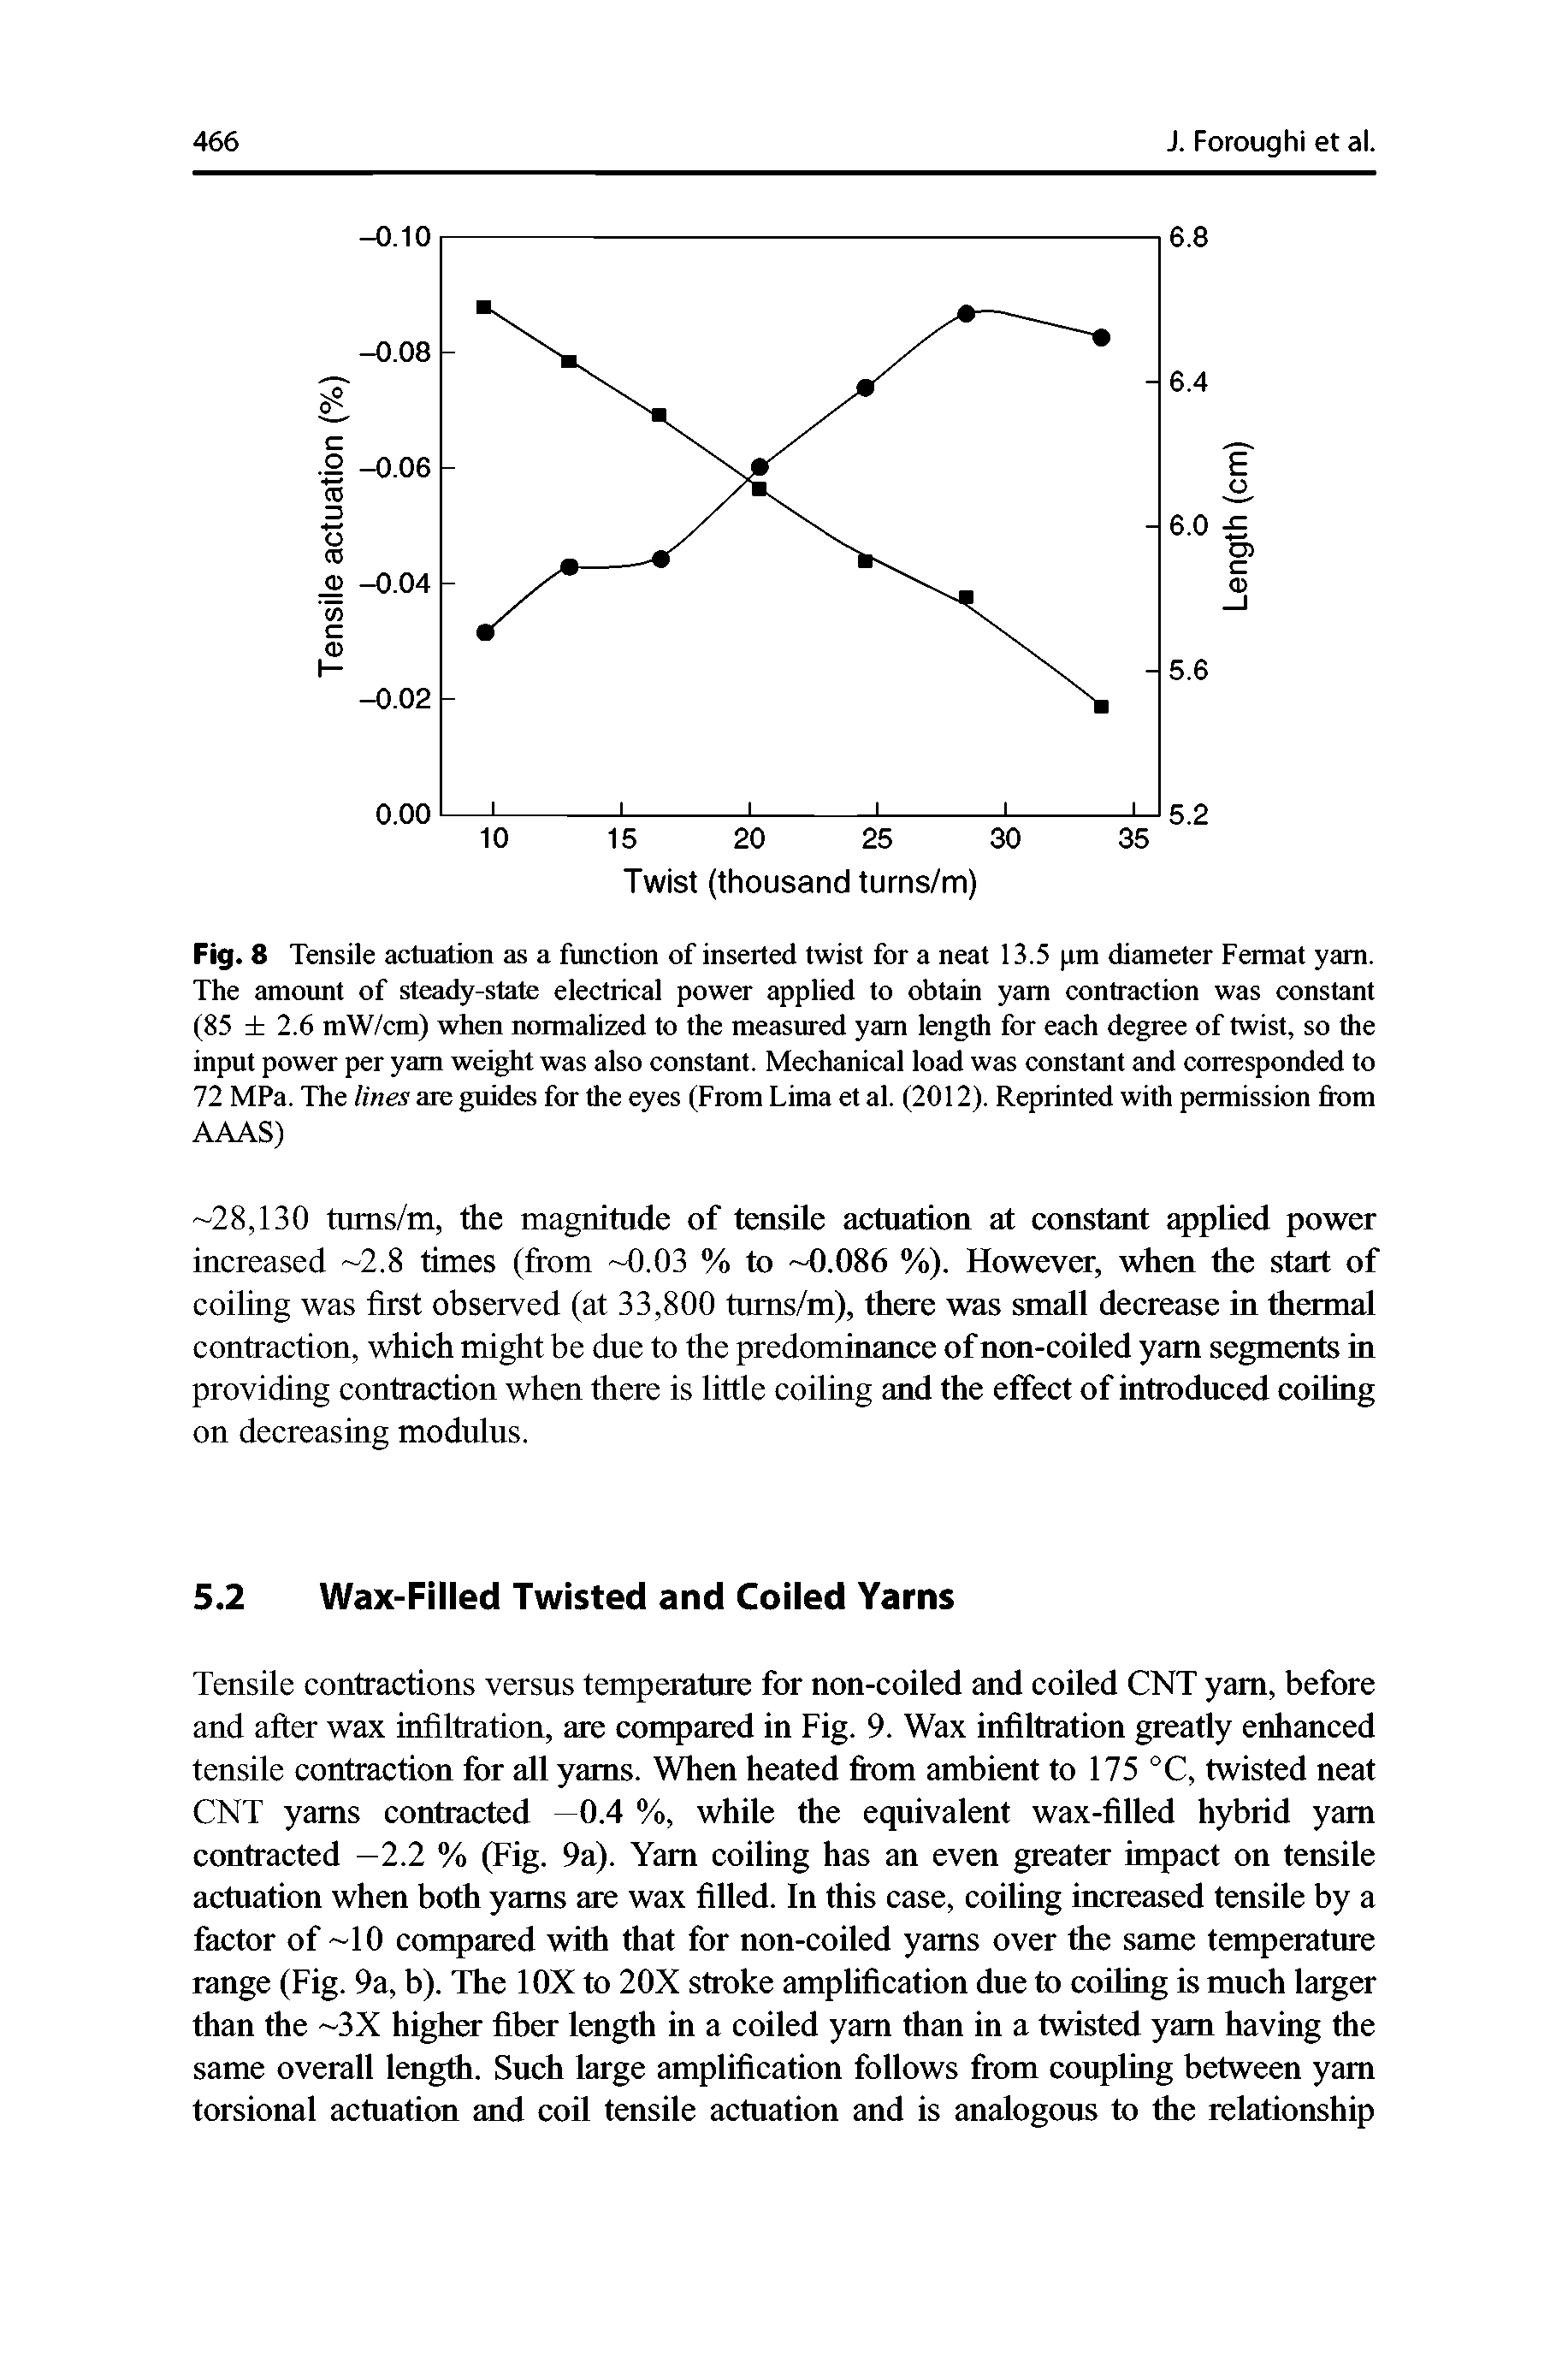 Fig. 8 Tensile actuation as a function of inserted twist for a neat 13.5 )tm diameter Fermat yam. The amount of steady-state electrical power applied to obtain yam contraction was constant (85 2.6 mW/cm) when normalized to the measured yam length for each degree of twist, so the input power per yam weight was also constant. Mechanical load was constant and corresponded to 72 MPa. The lines are guides for the eyes (From Lima et al. (2012). Reprinted with permission from AAAS)...